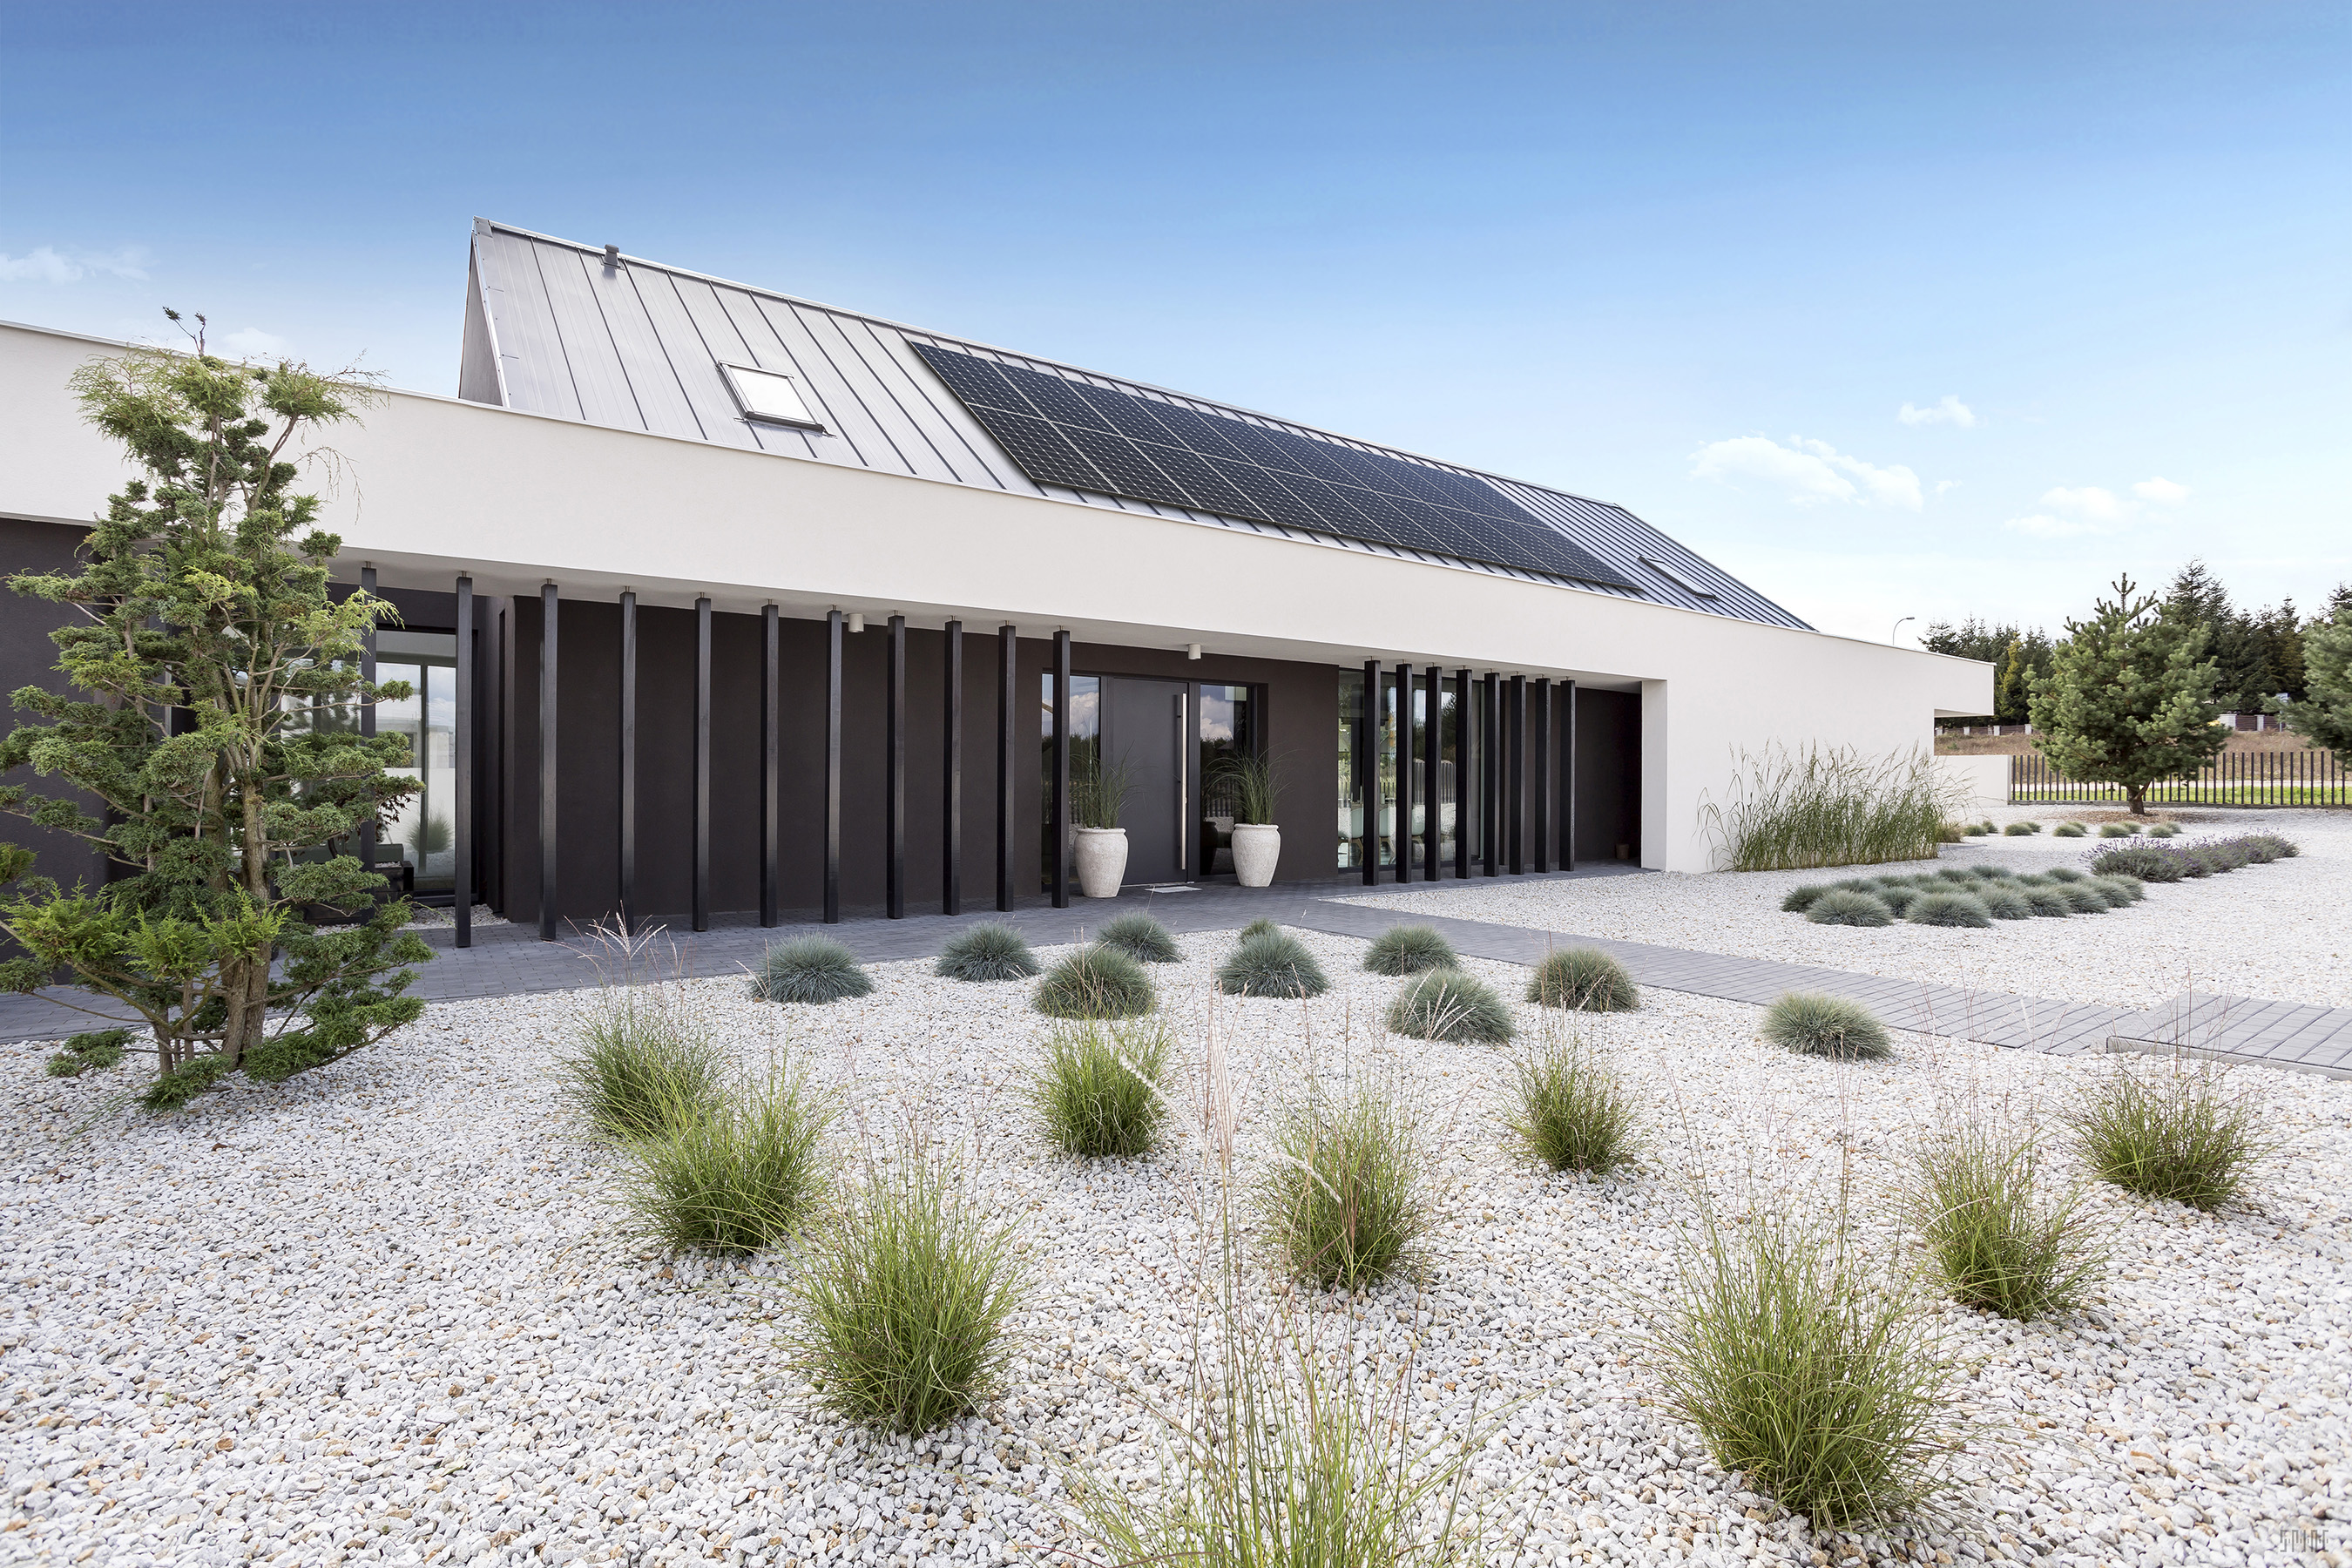 SunPower Launches Industry's First 400PlusWatt Home Solar Panels, the Most Powerful